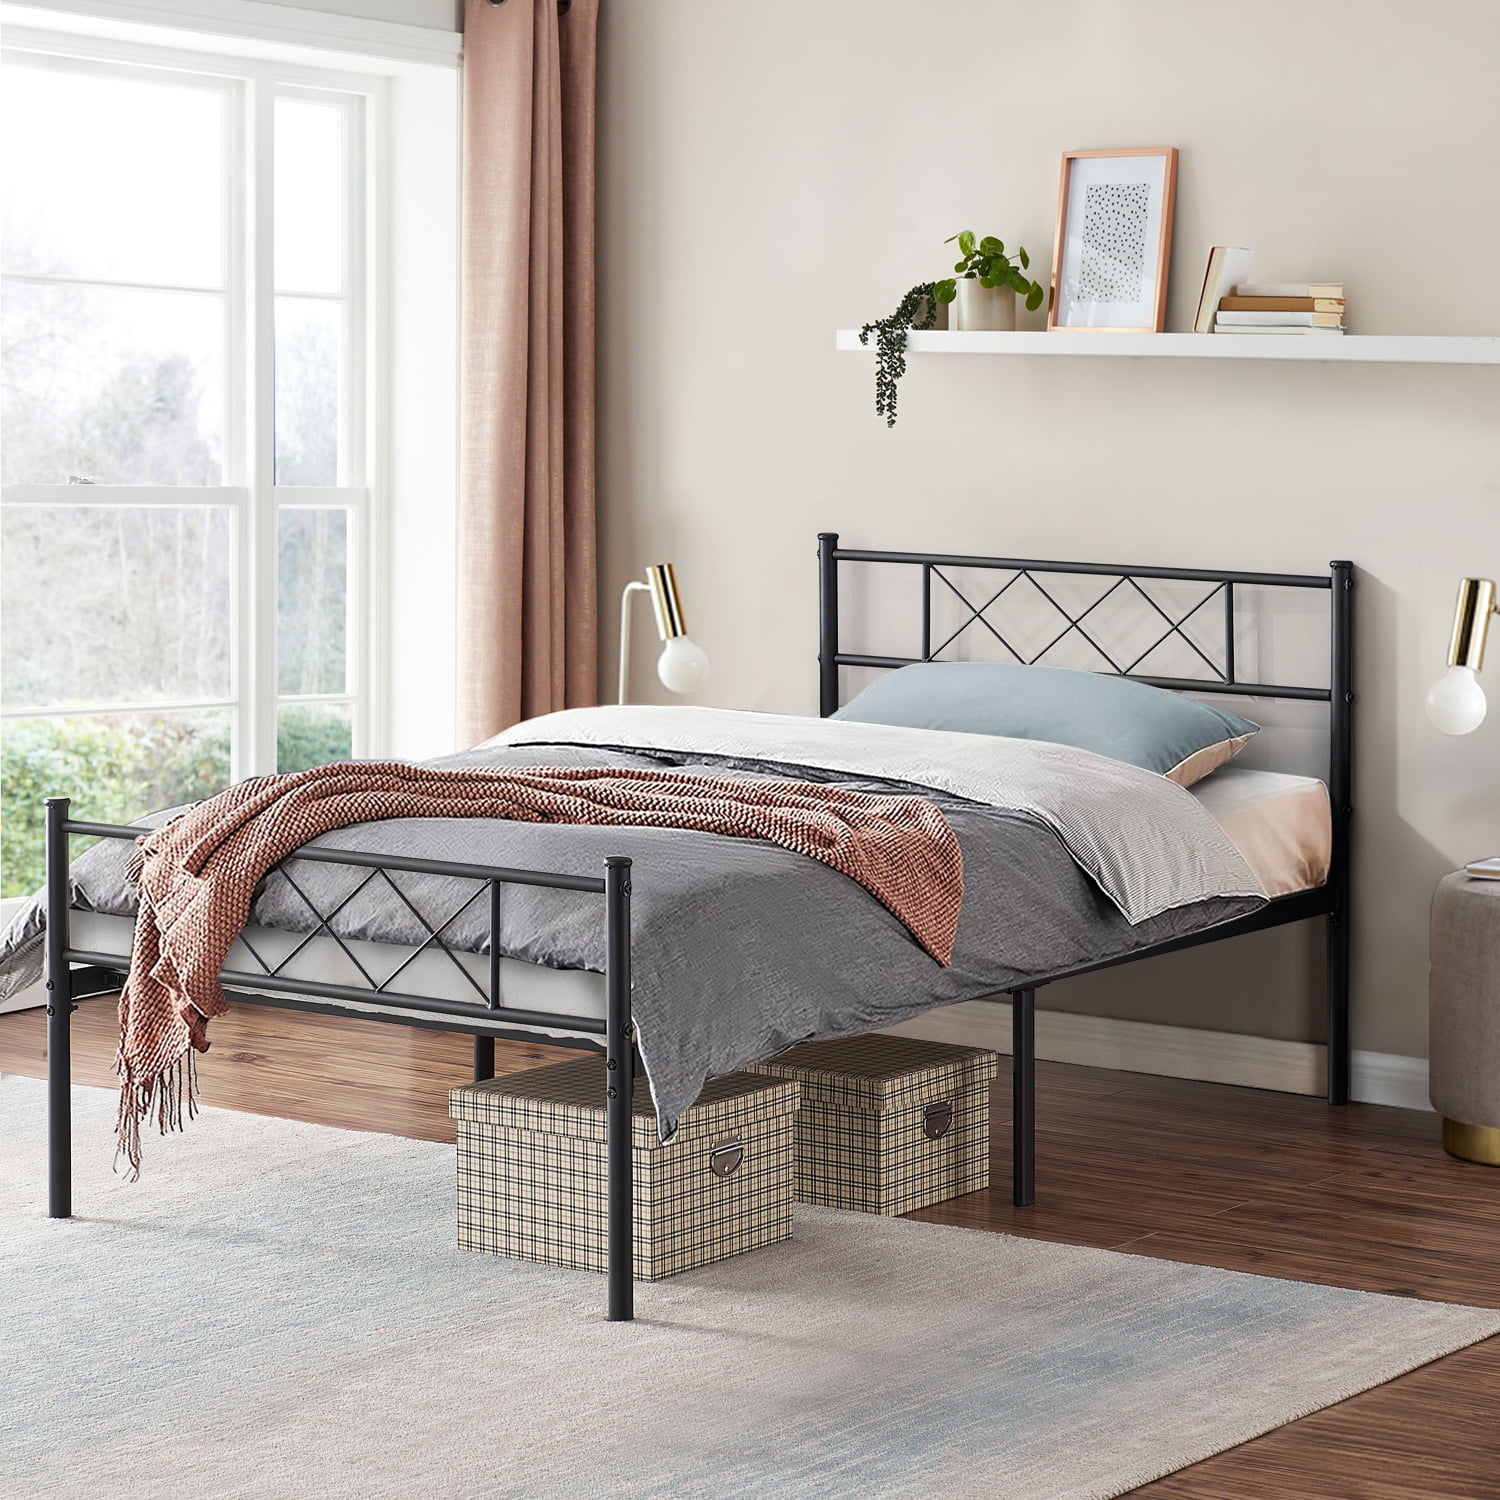 Twin Size Metal Platform Bed Frame With, How To Attach A Headboard And Footboard Bed Frame